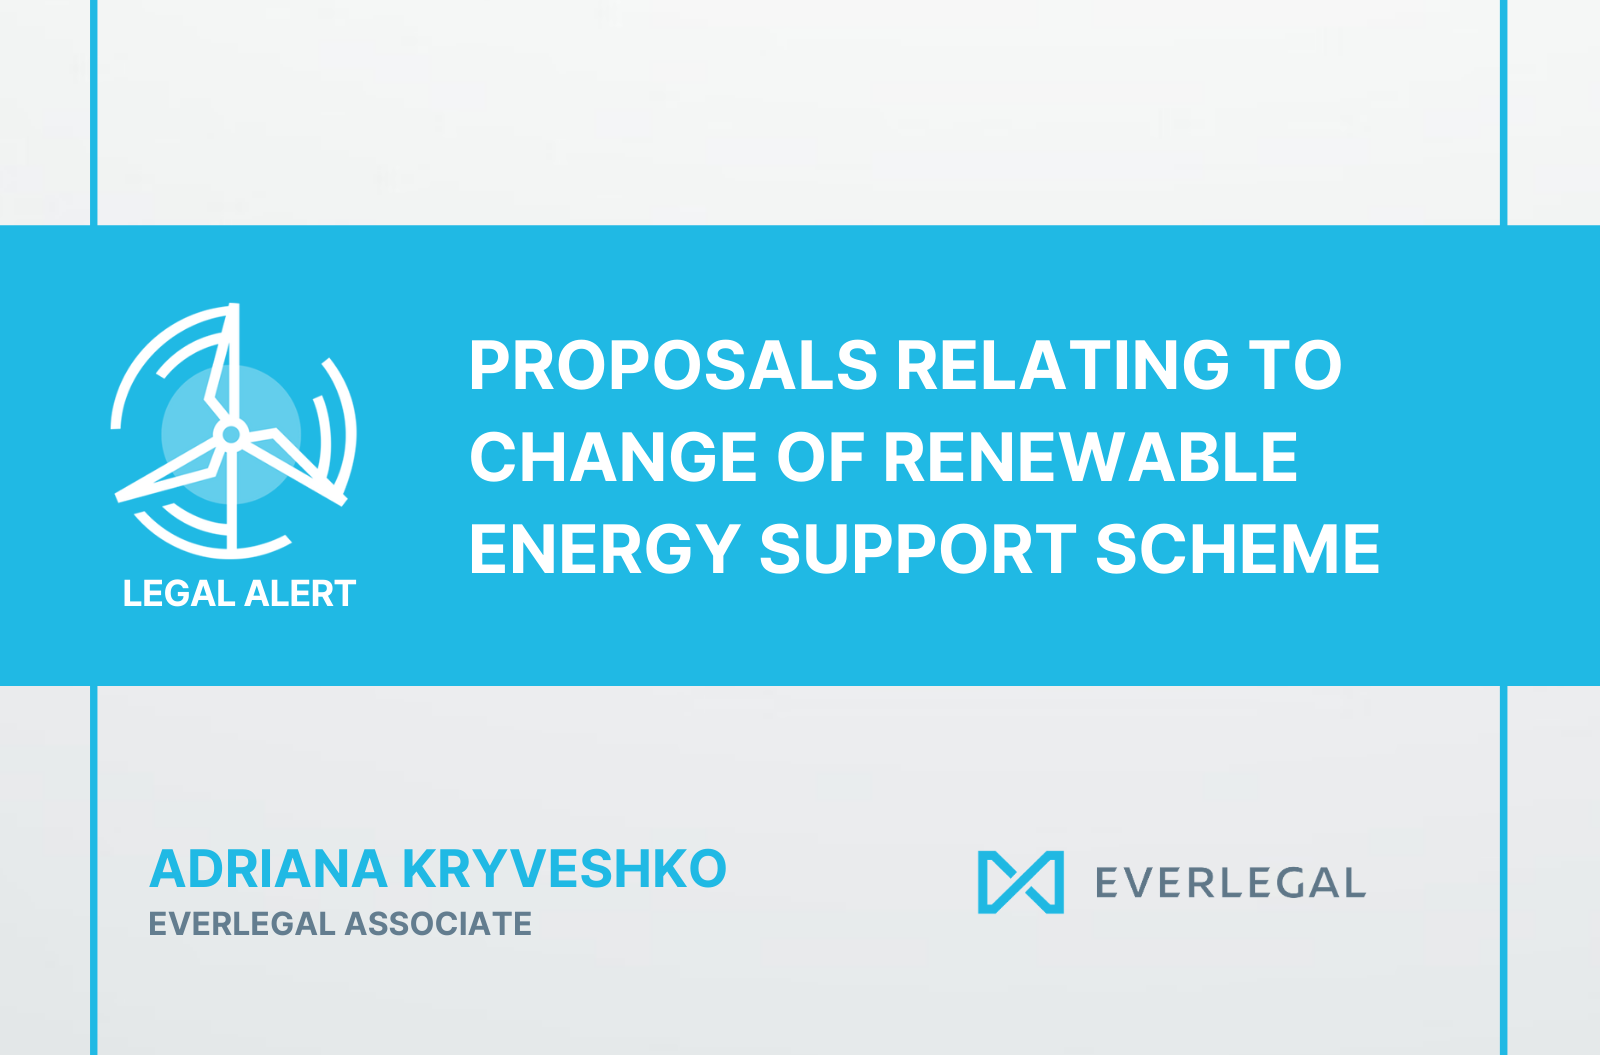 Proposals relating to change of renewable energy support scheme